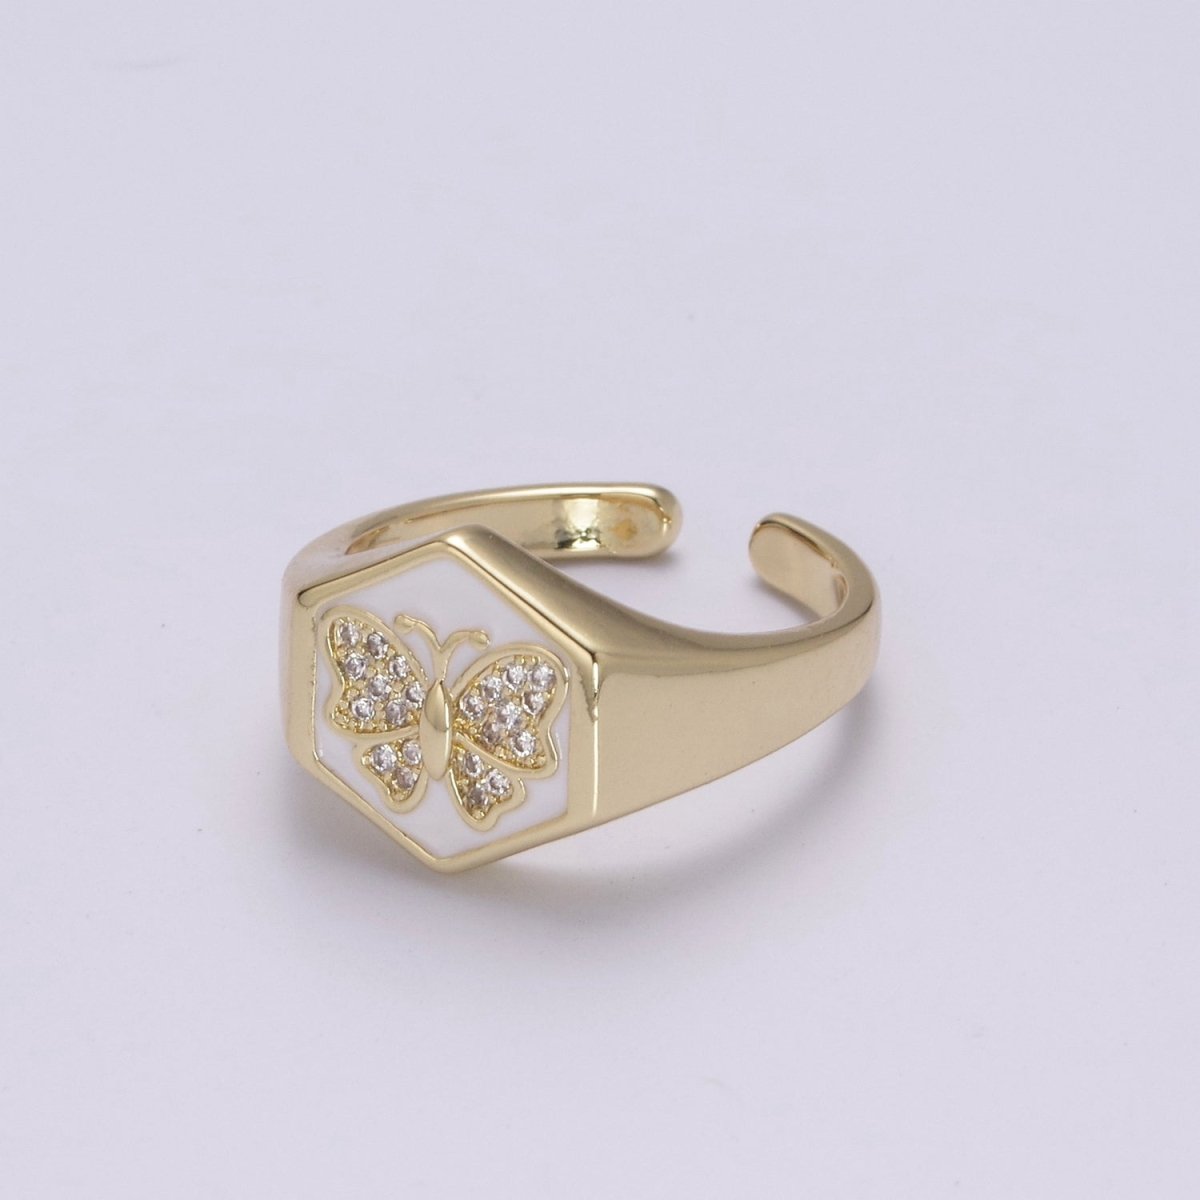 Gold signet ring, Butterfly signet ring, Enamel ring gold butterfly ring Stackable Jewelry U-171~U-175 - DLUXCA